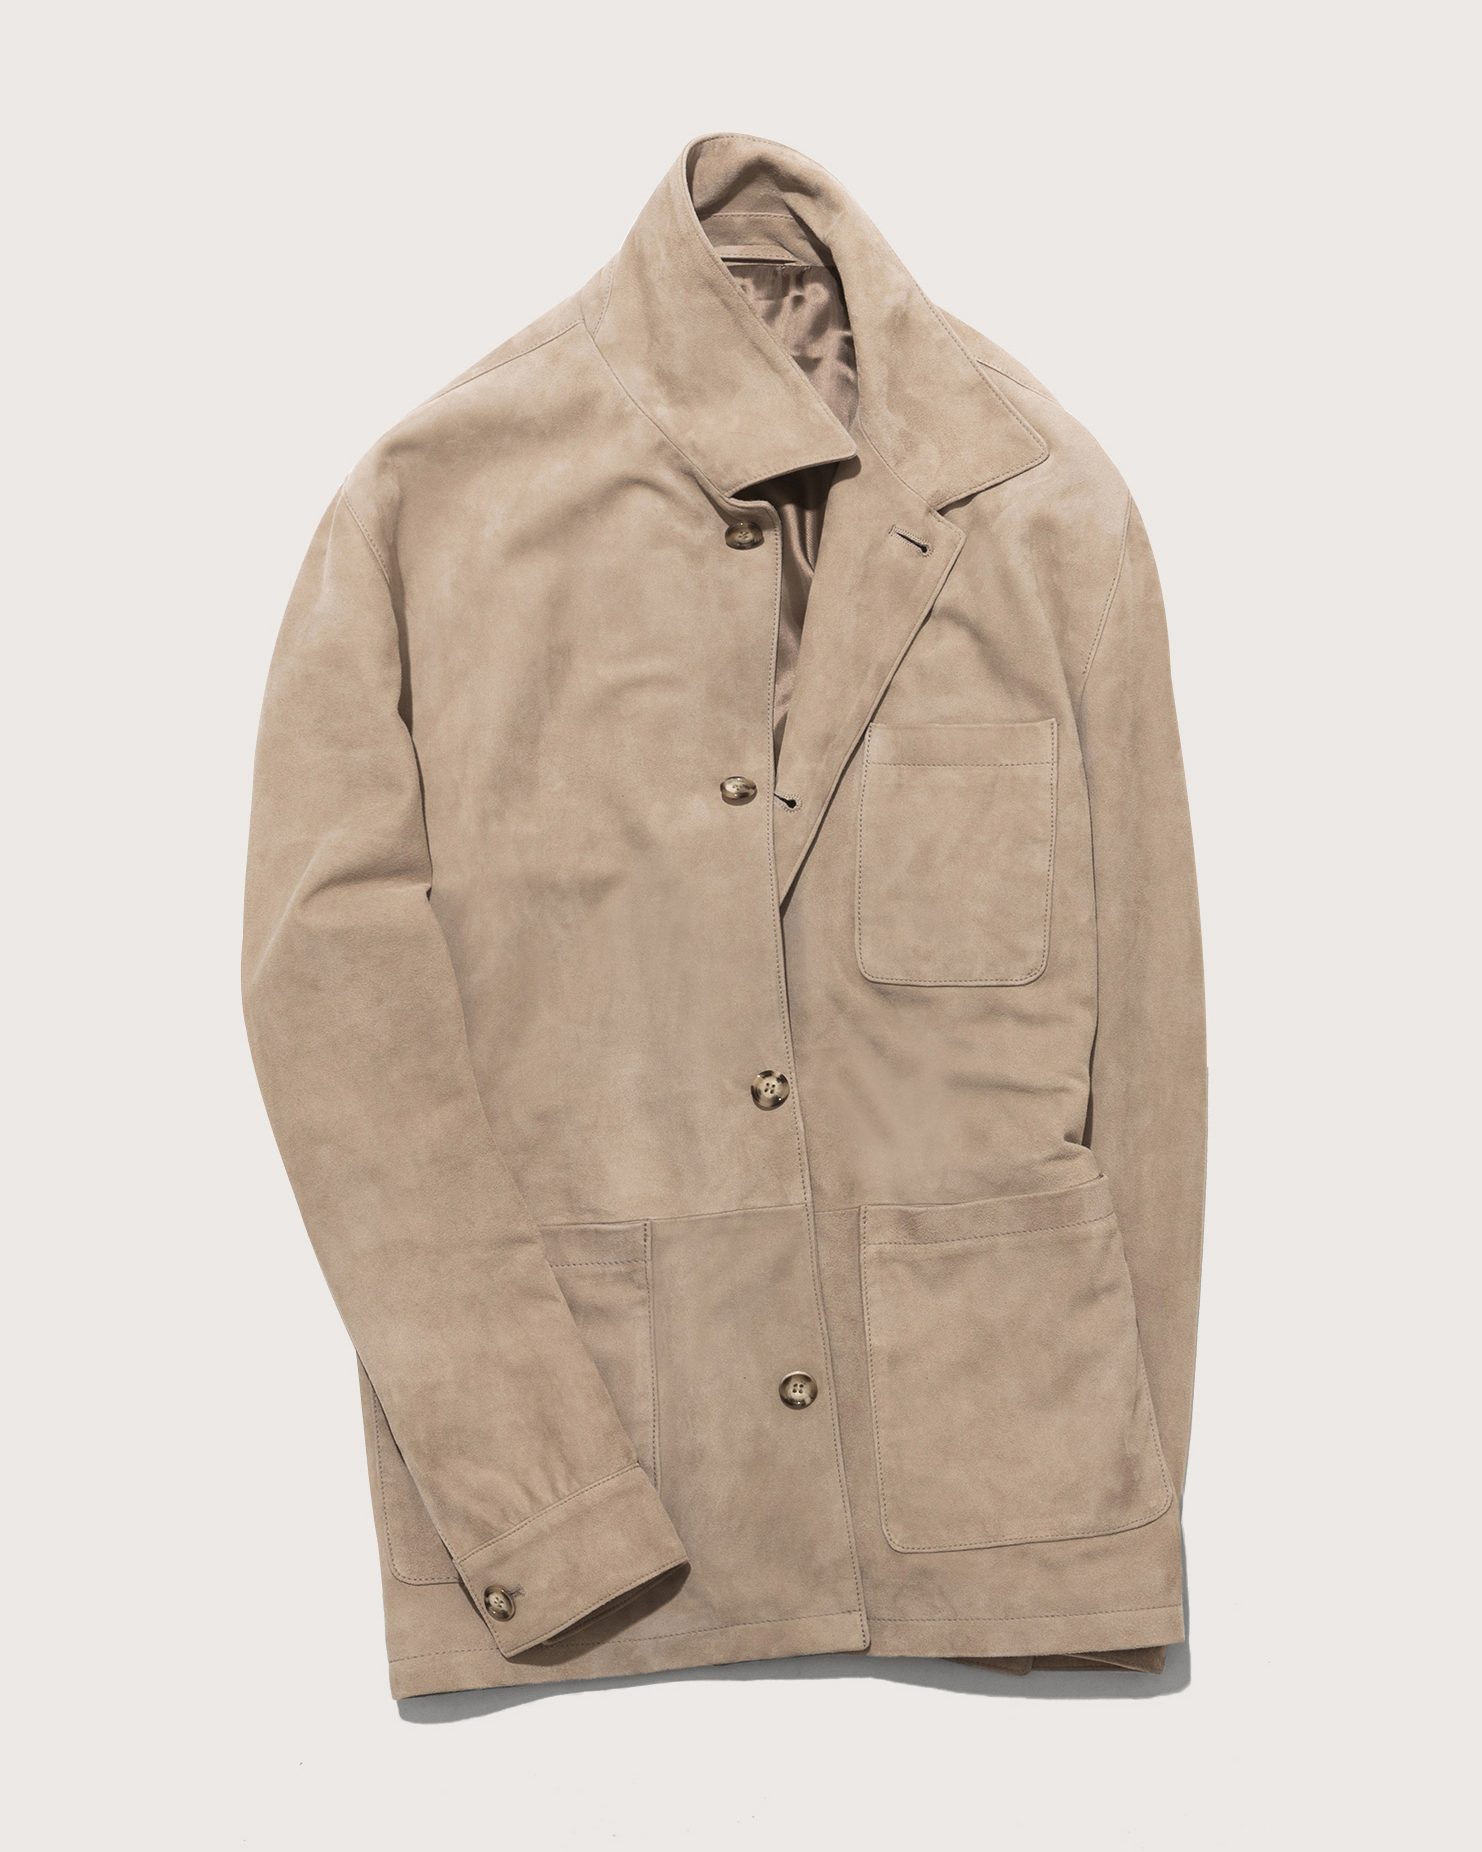 The Suede Shirt Jacket